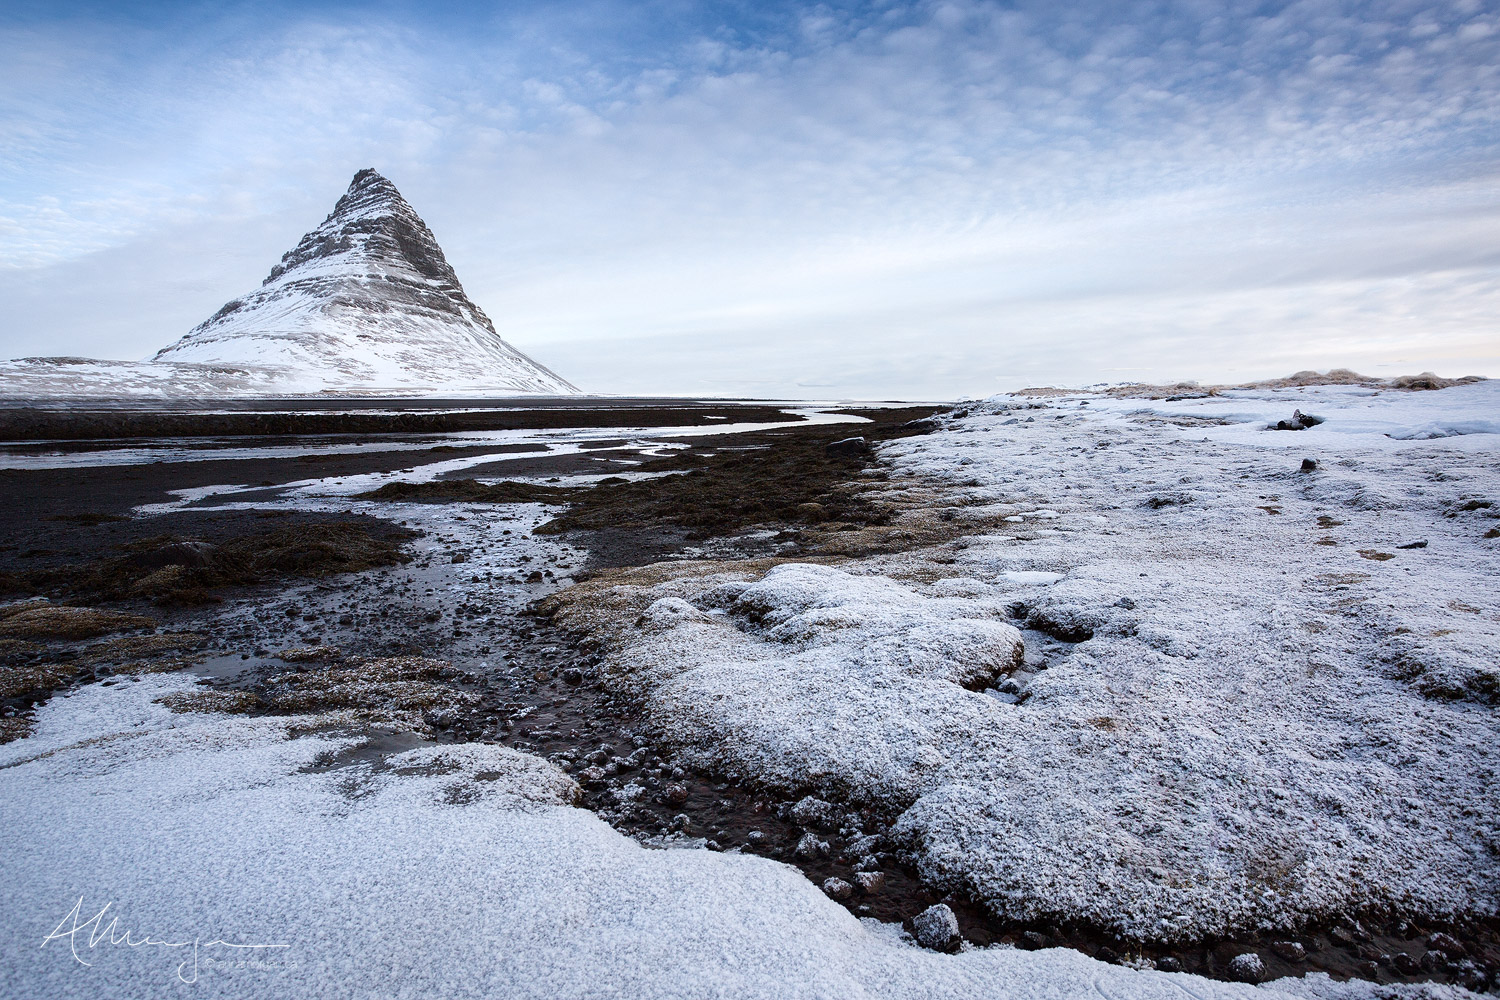 The iconic Kirkjufell mountain in Iceland taken from the nearby black sand beach at low tide with a fresh snowfall gently blanketing the seaweed.